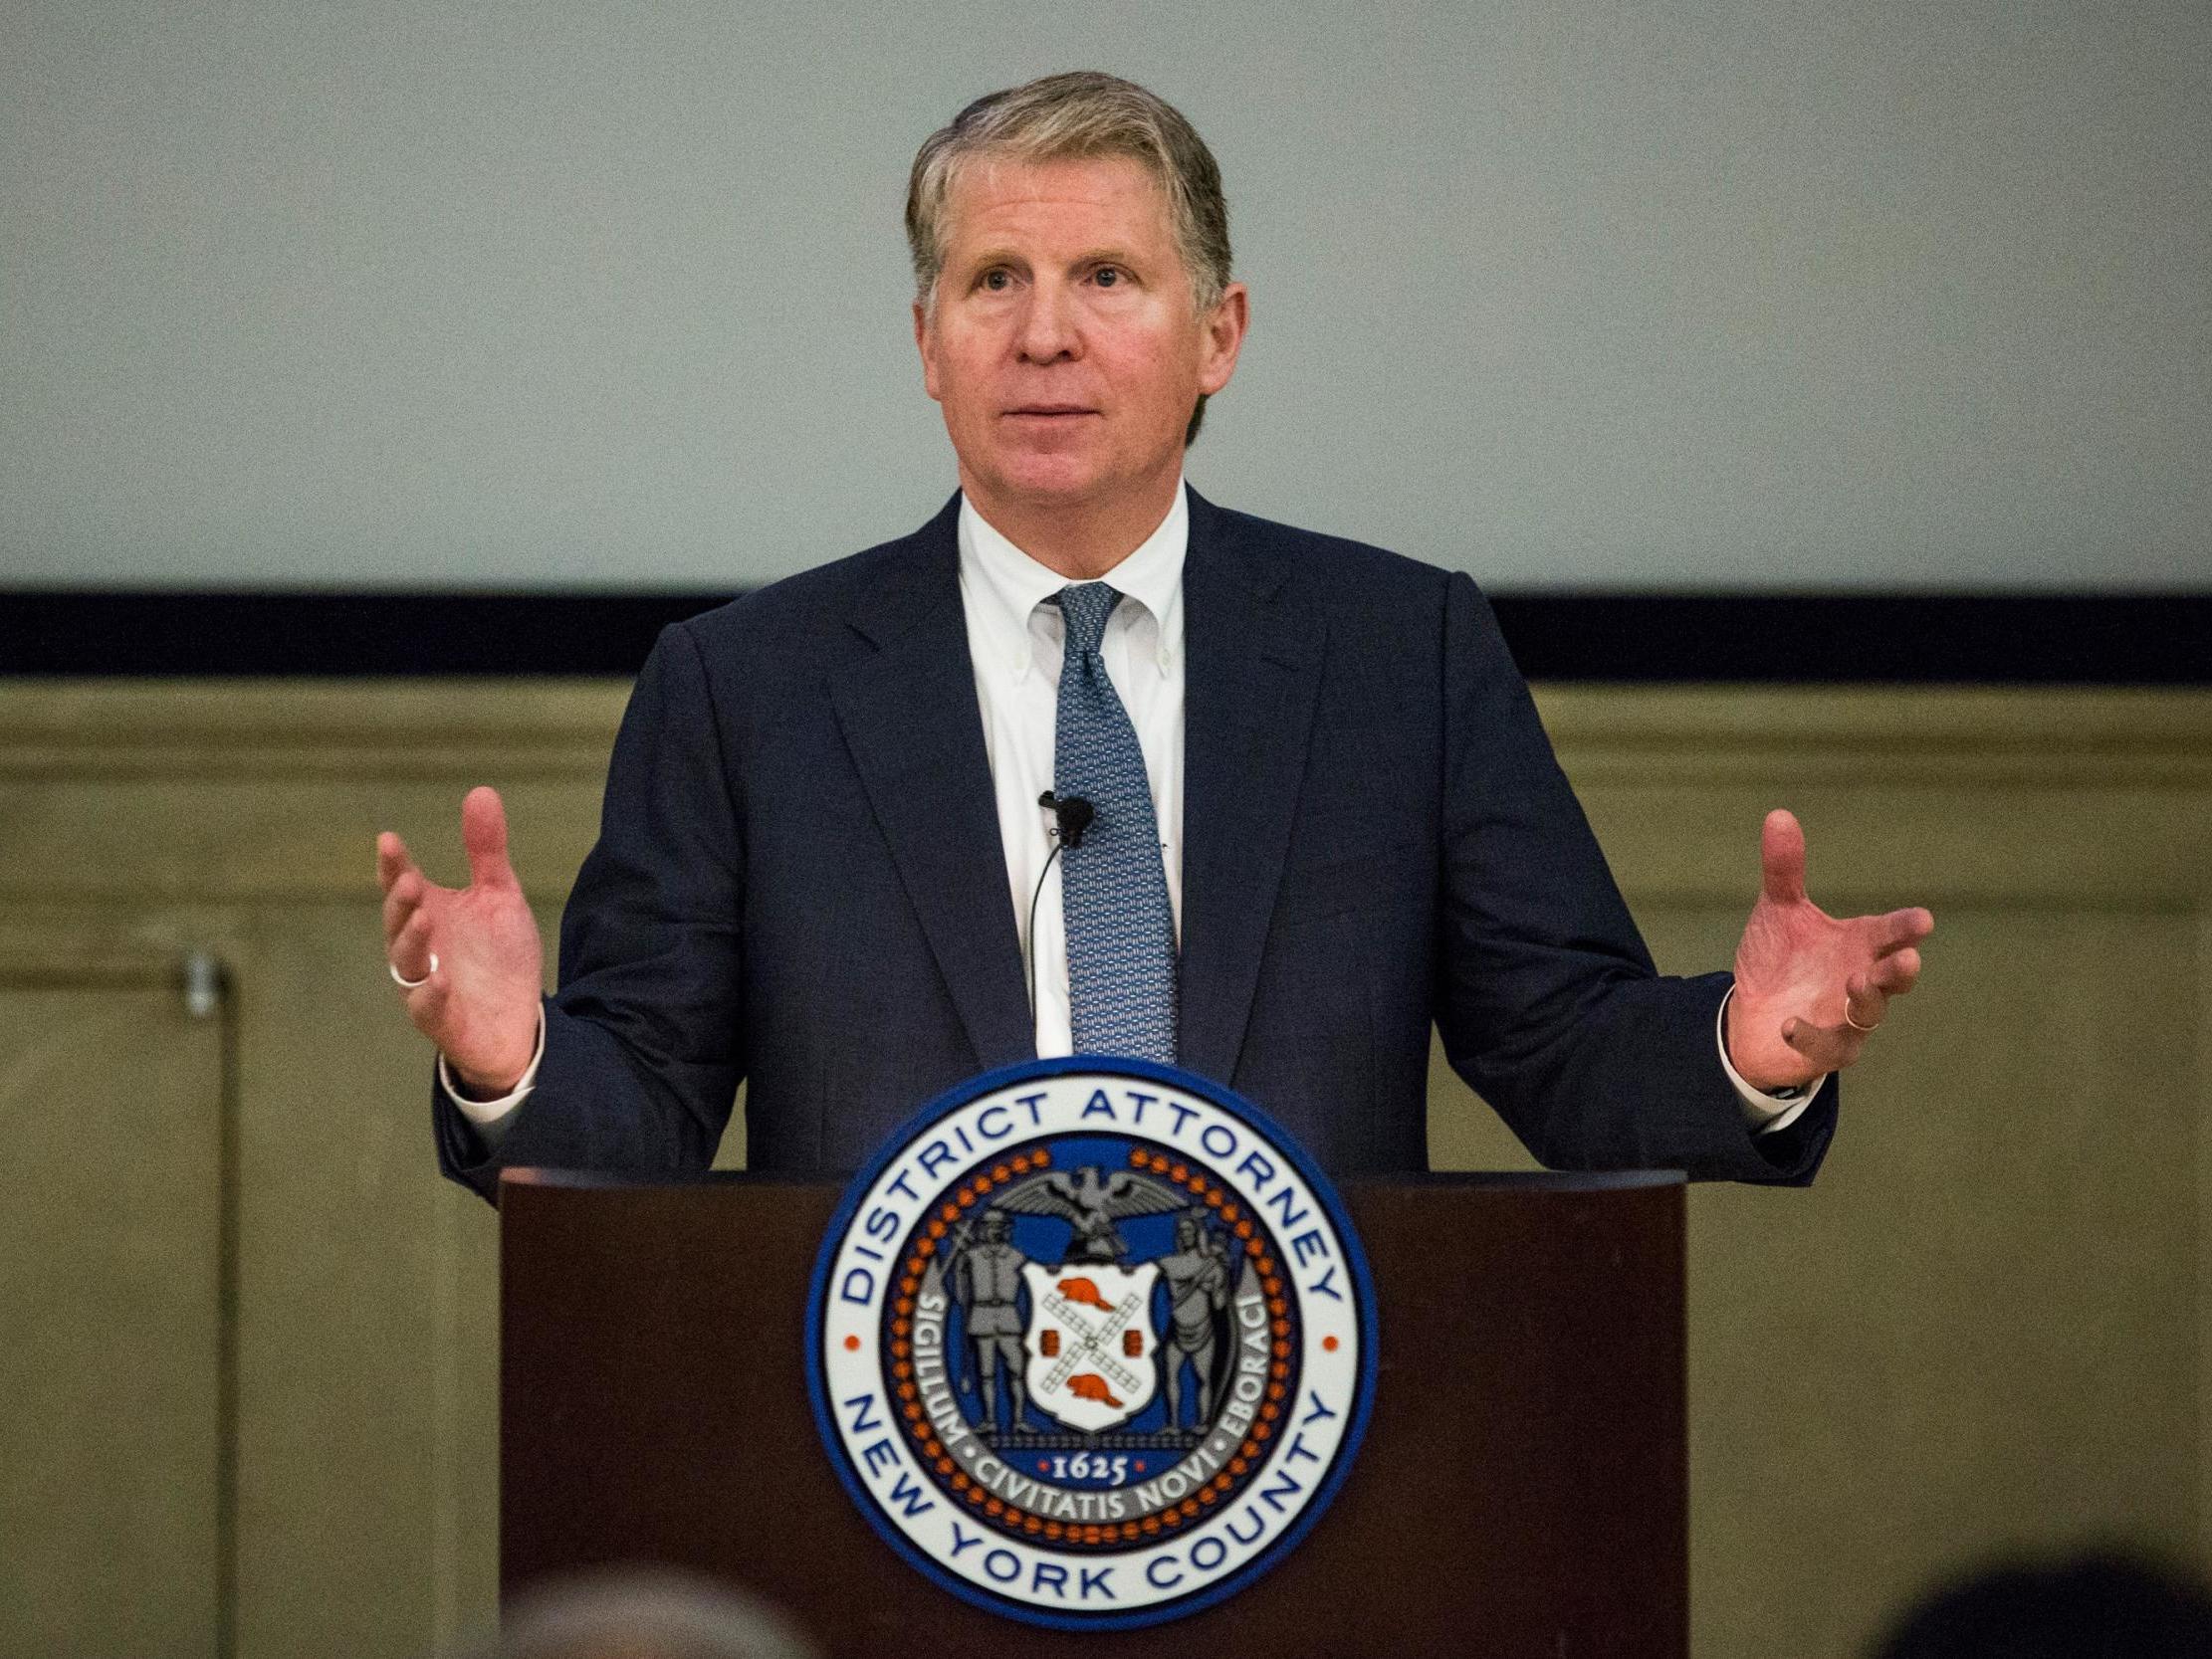 Manhattan District Attorney Cyrus Vance Jr. is calling for a change in law to allow women sexually assaulted on nights out justice